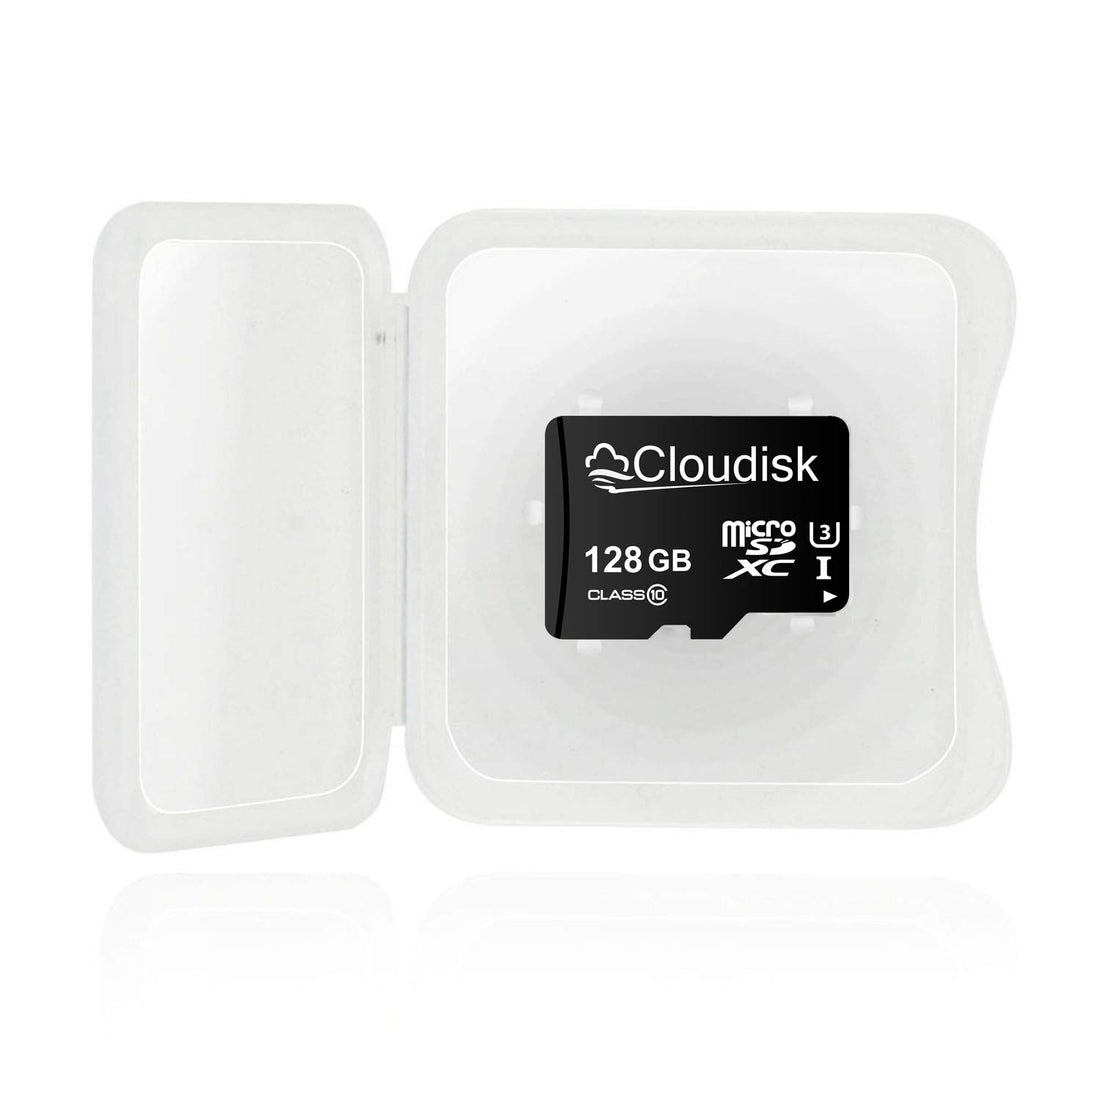 Cloudisk Small Capacity 5Pack 128MB Micro SD Card in Bulk Pack (NOT GB) with SD Adapter USB Card Reader Memory Card for Small Data, Files, Advertising or Promotion (Too Small for Any Videos)